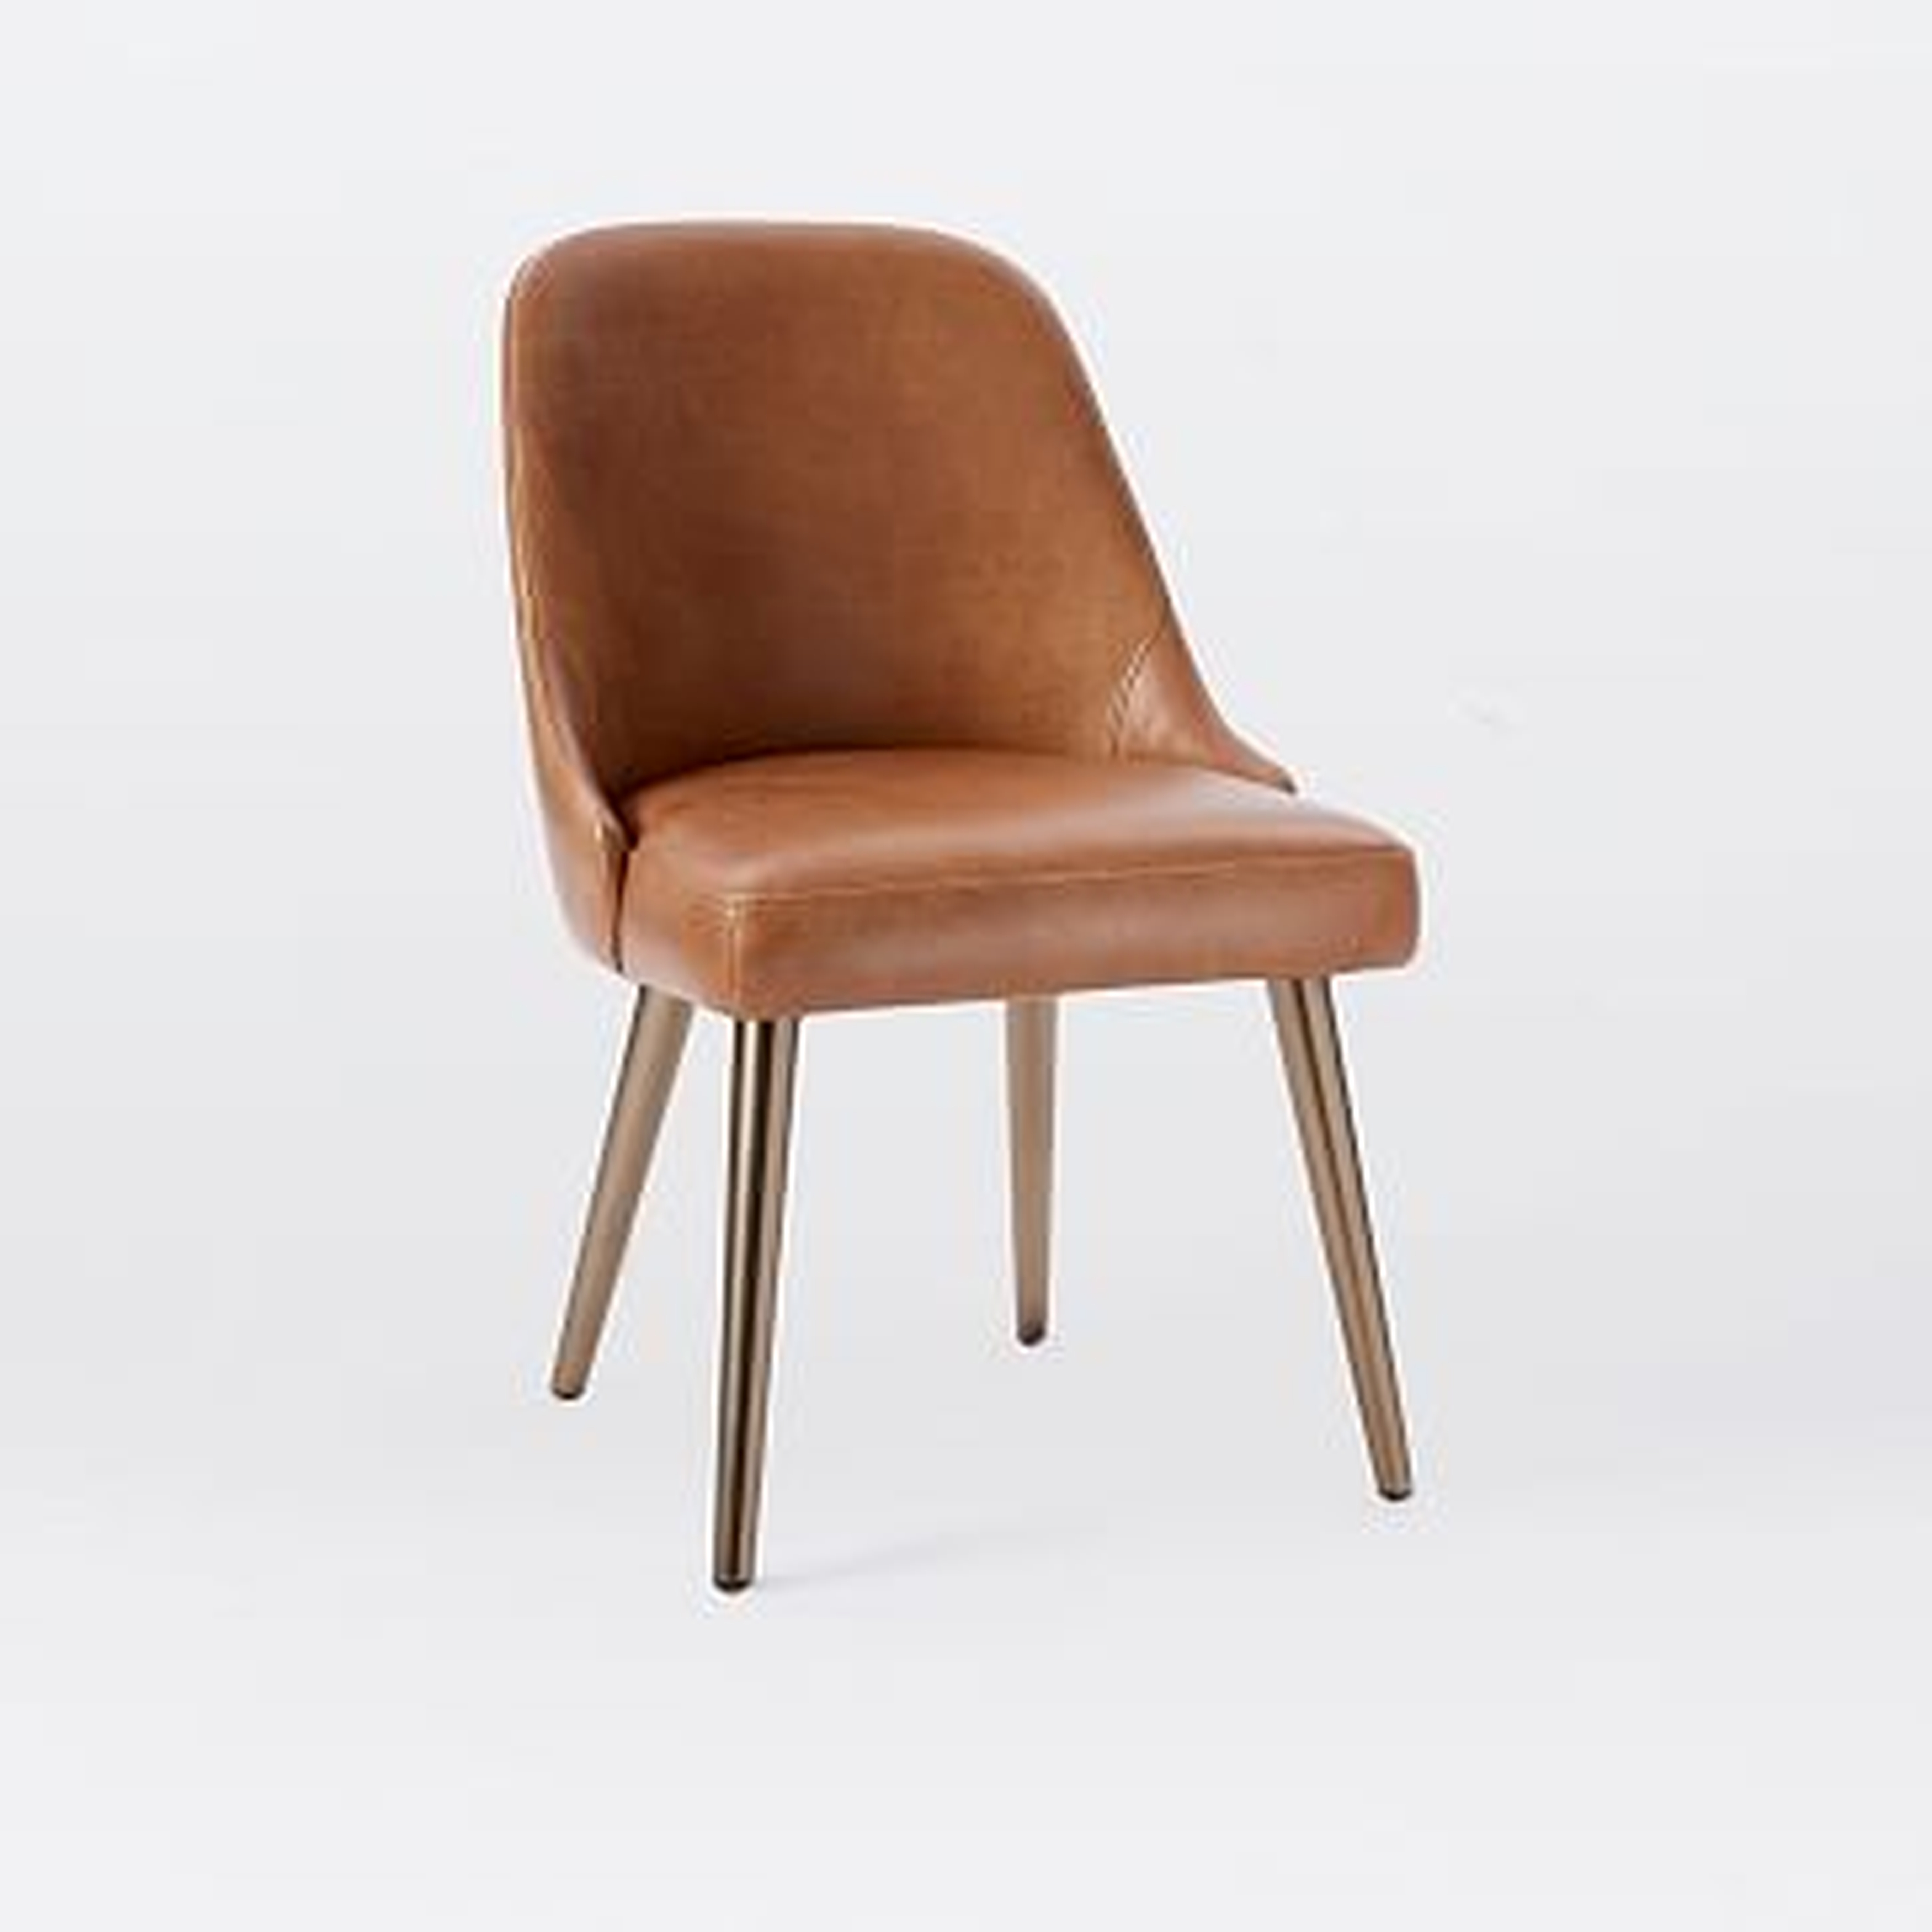 Mid-Century Dining Chair, Saddle Leather, Nut, Blackened Brass - West Elm